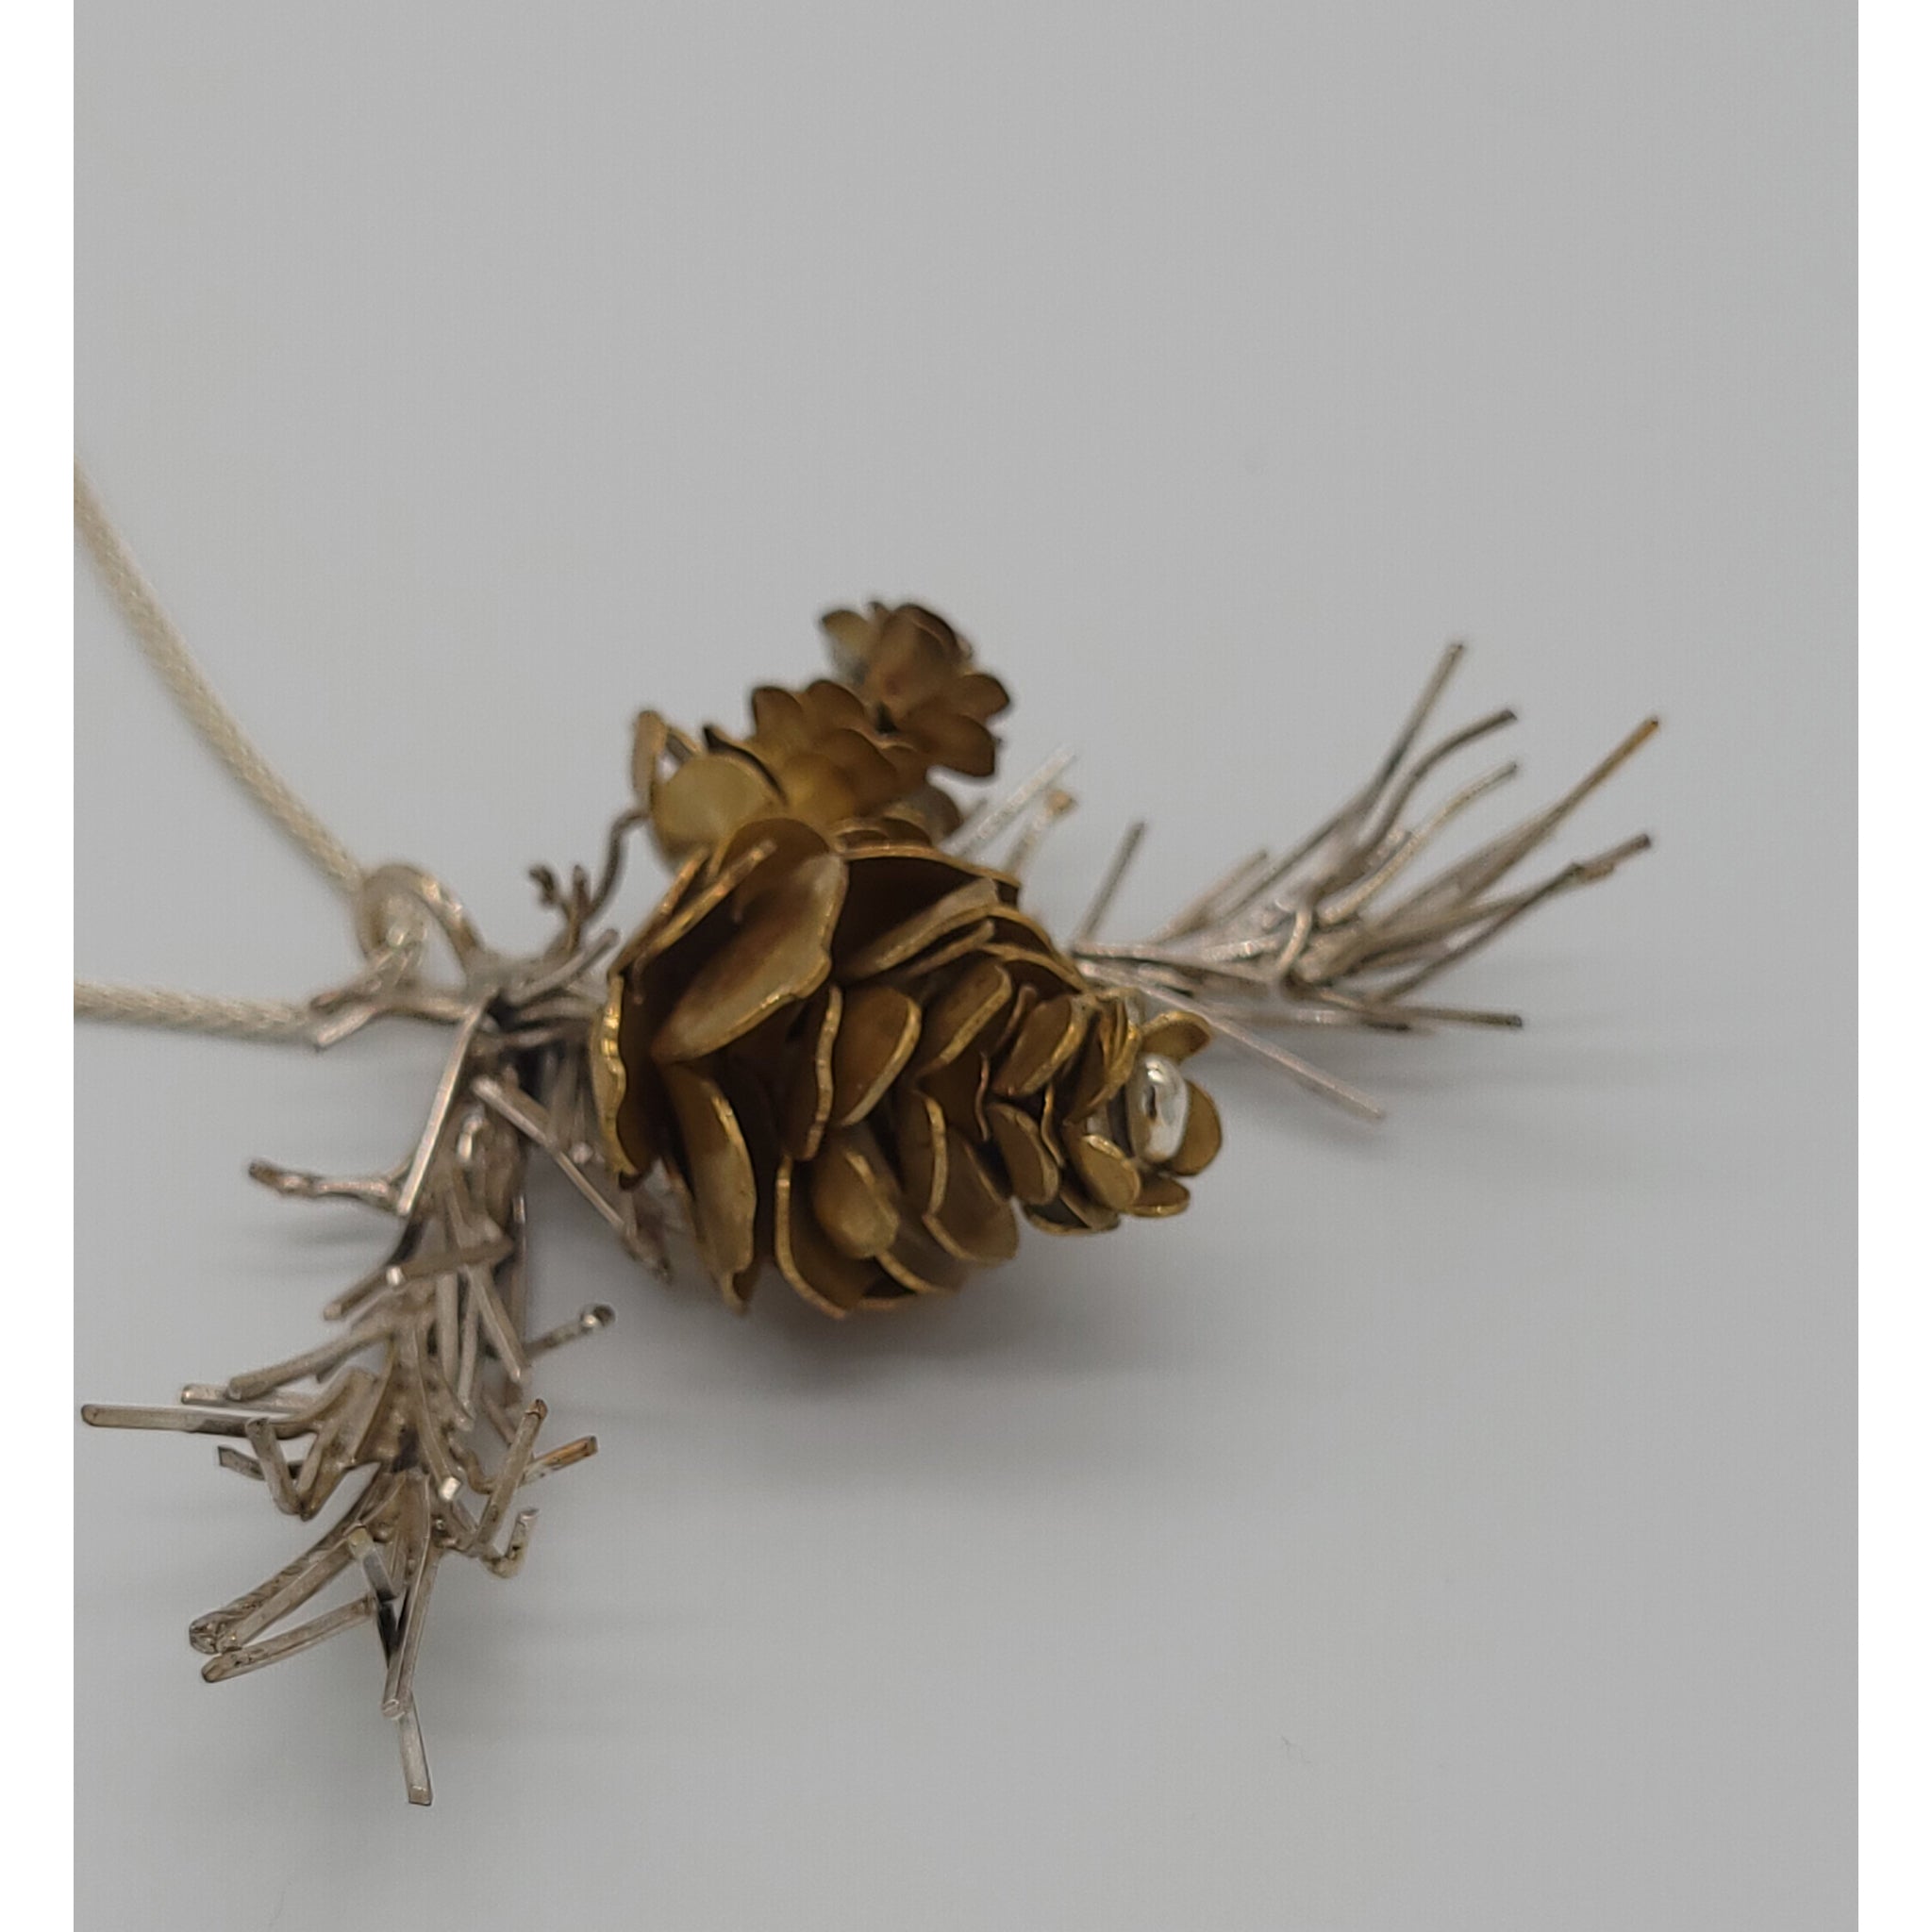 Silver Garden Designs Brass Pine Cones Sterling Silver Bough Necklace –  Sweetheart Gallery, LLC: Contemporary Craft Gallery, Fine American Craft,  Art, Decor, Handmade Home & Personal Accessories